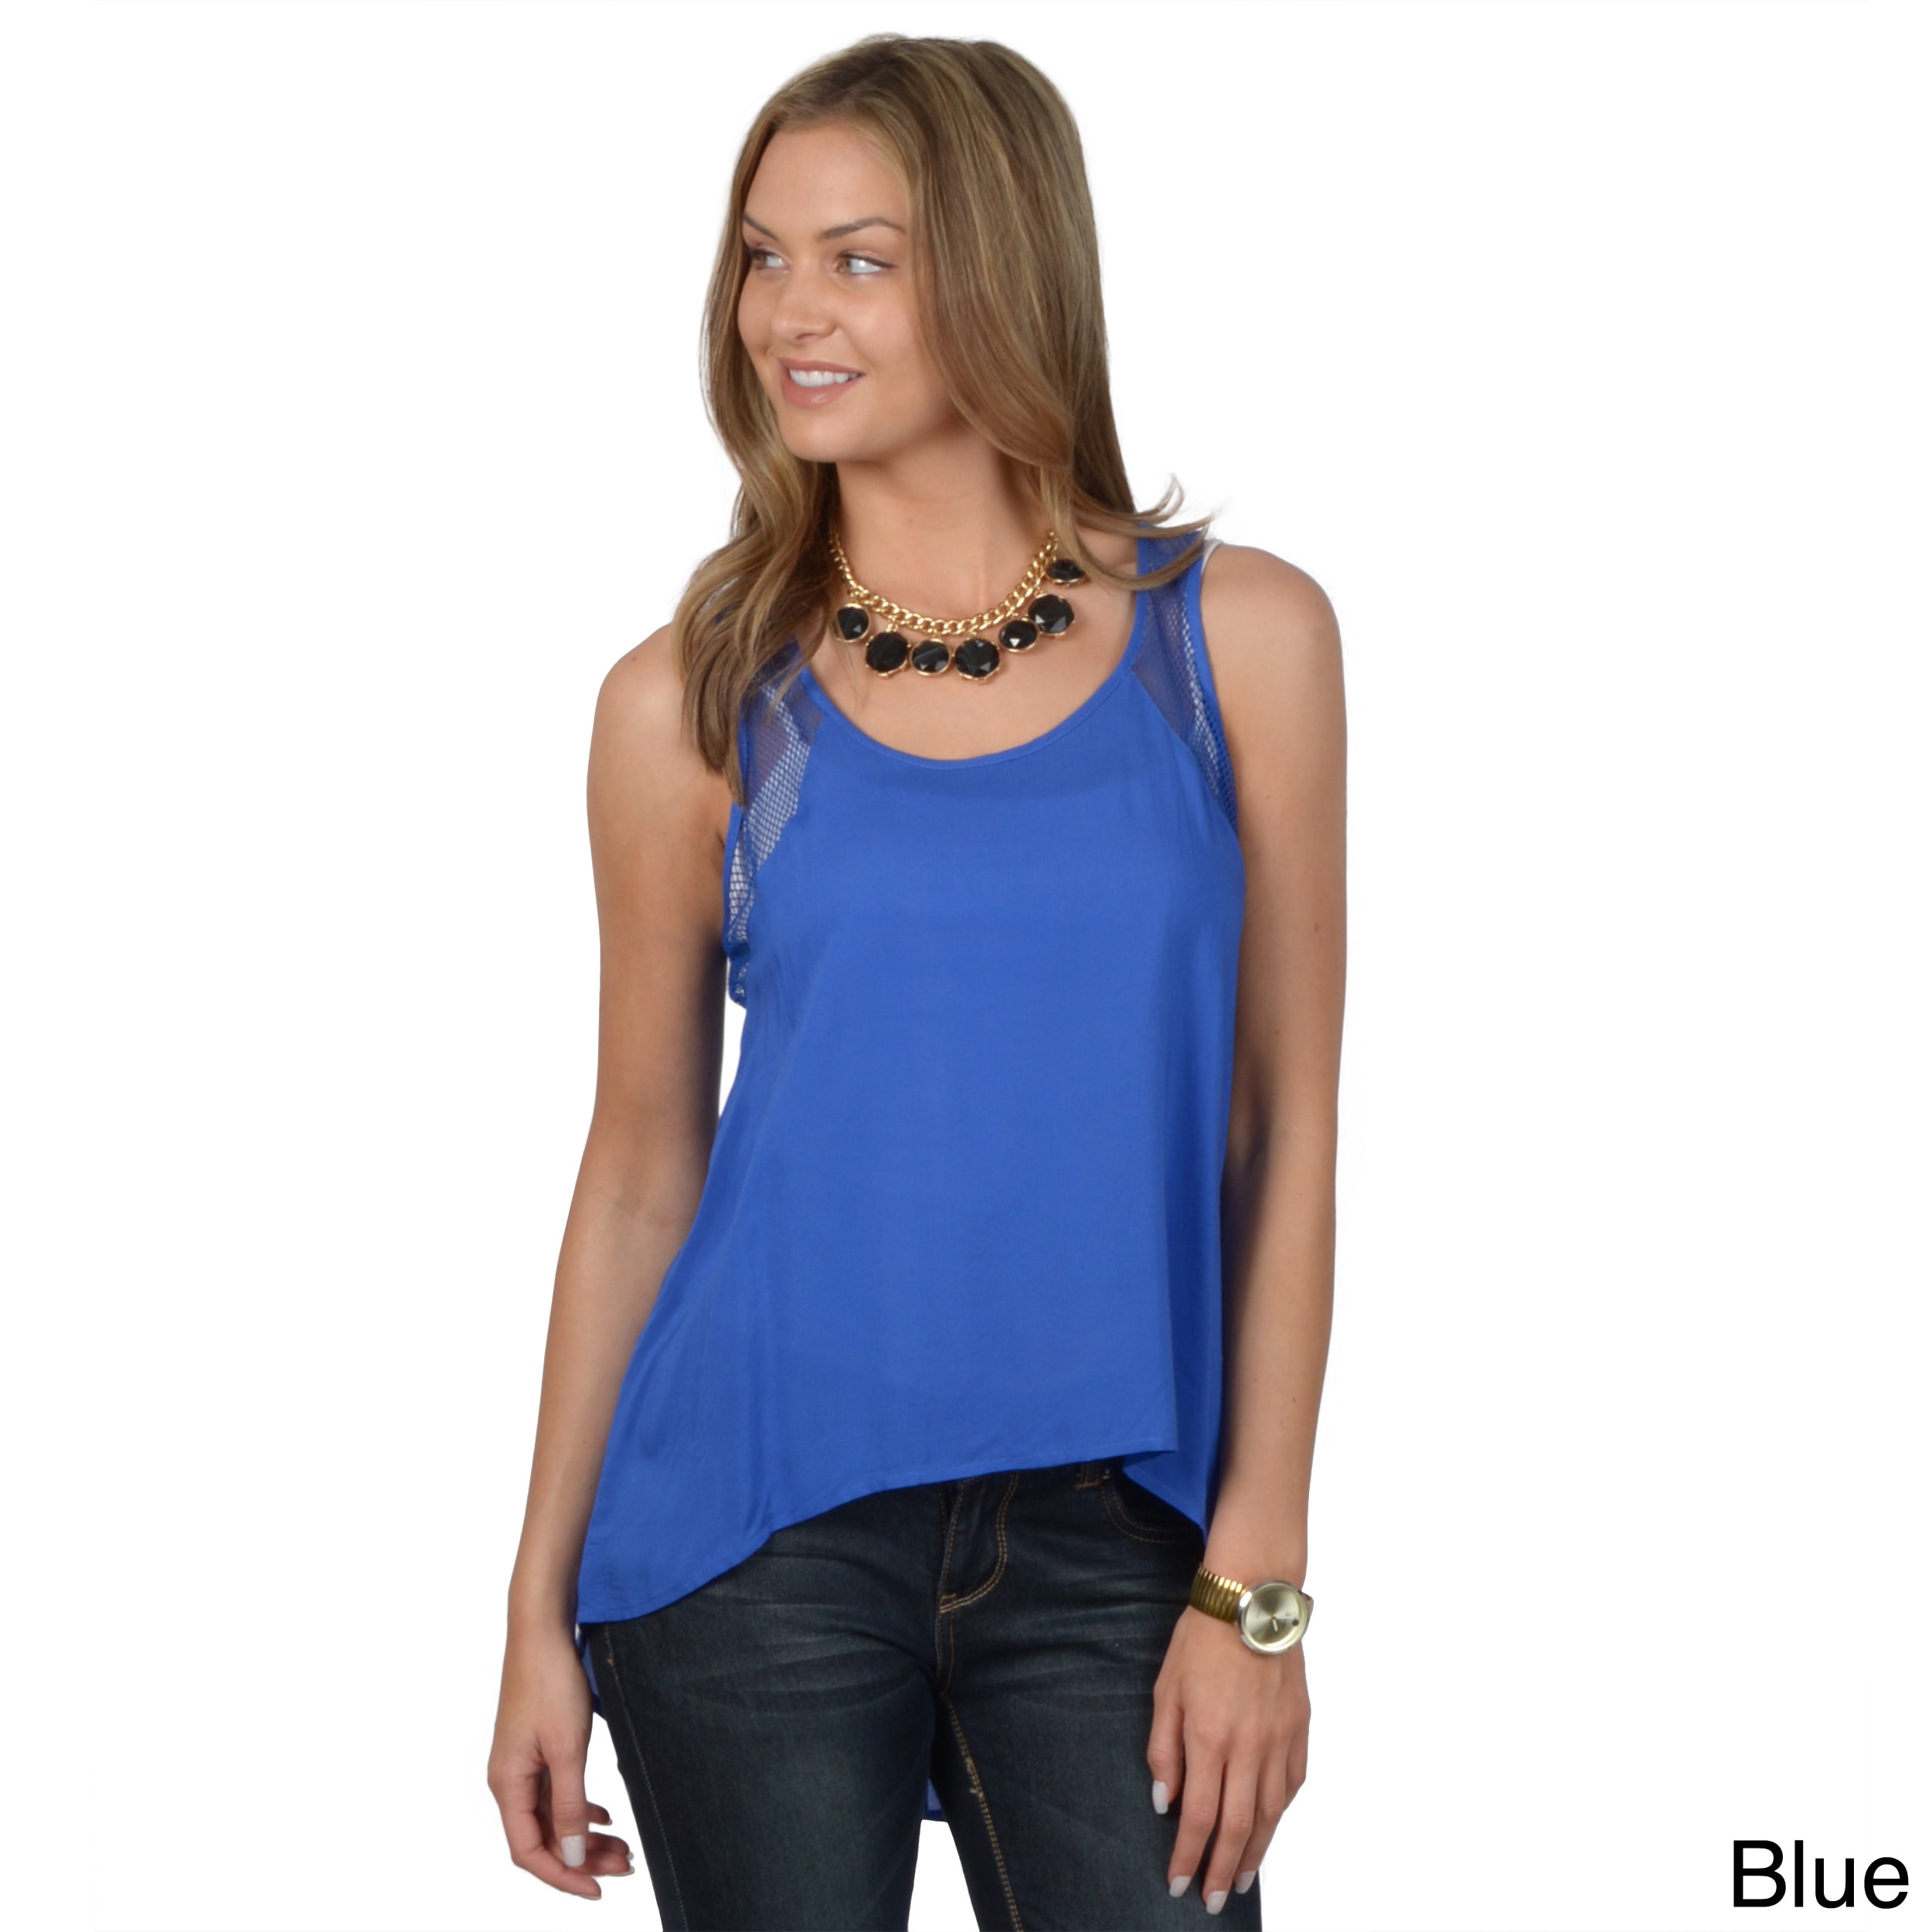 Hailey Jeans Co Hailey Jeans Co. Juniors Lightweight Sleeveless Top Blue Size S (1  3)